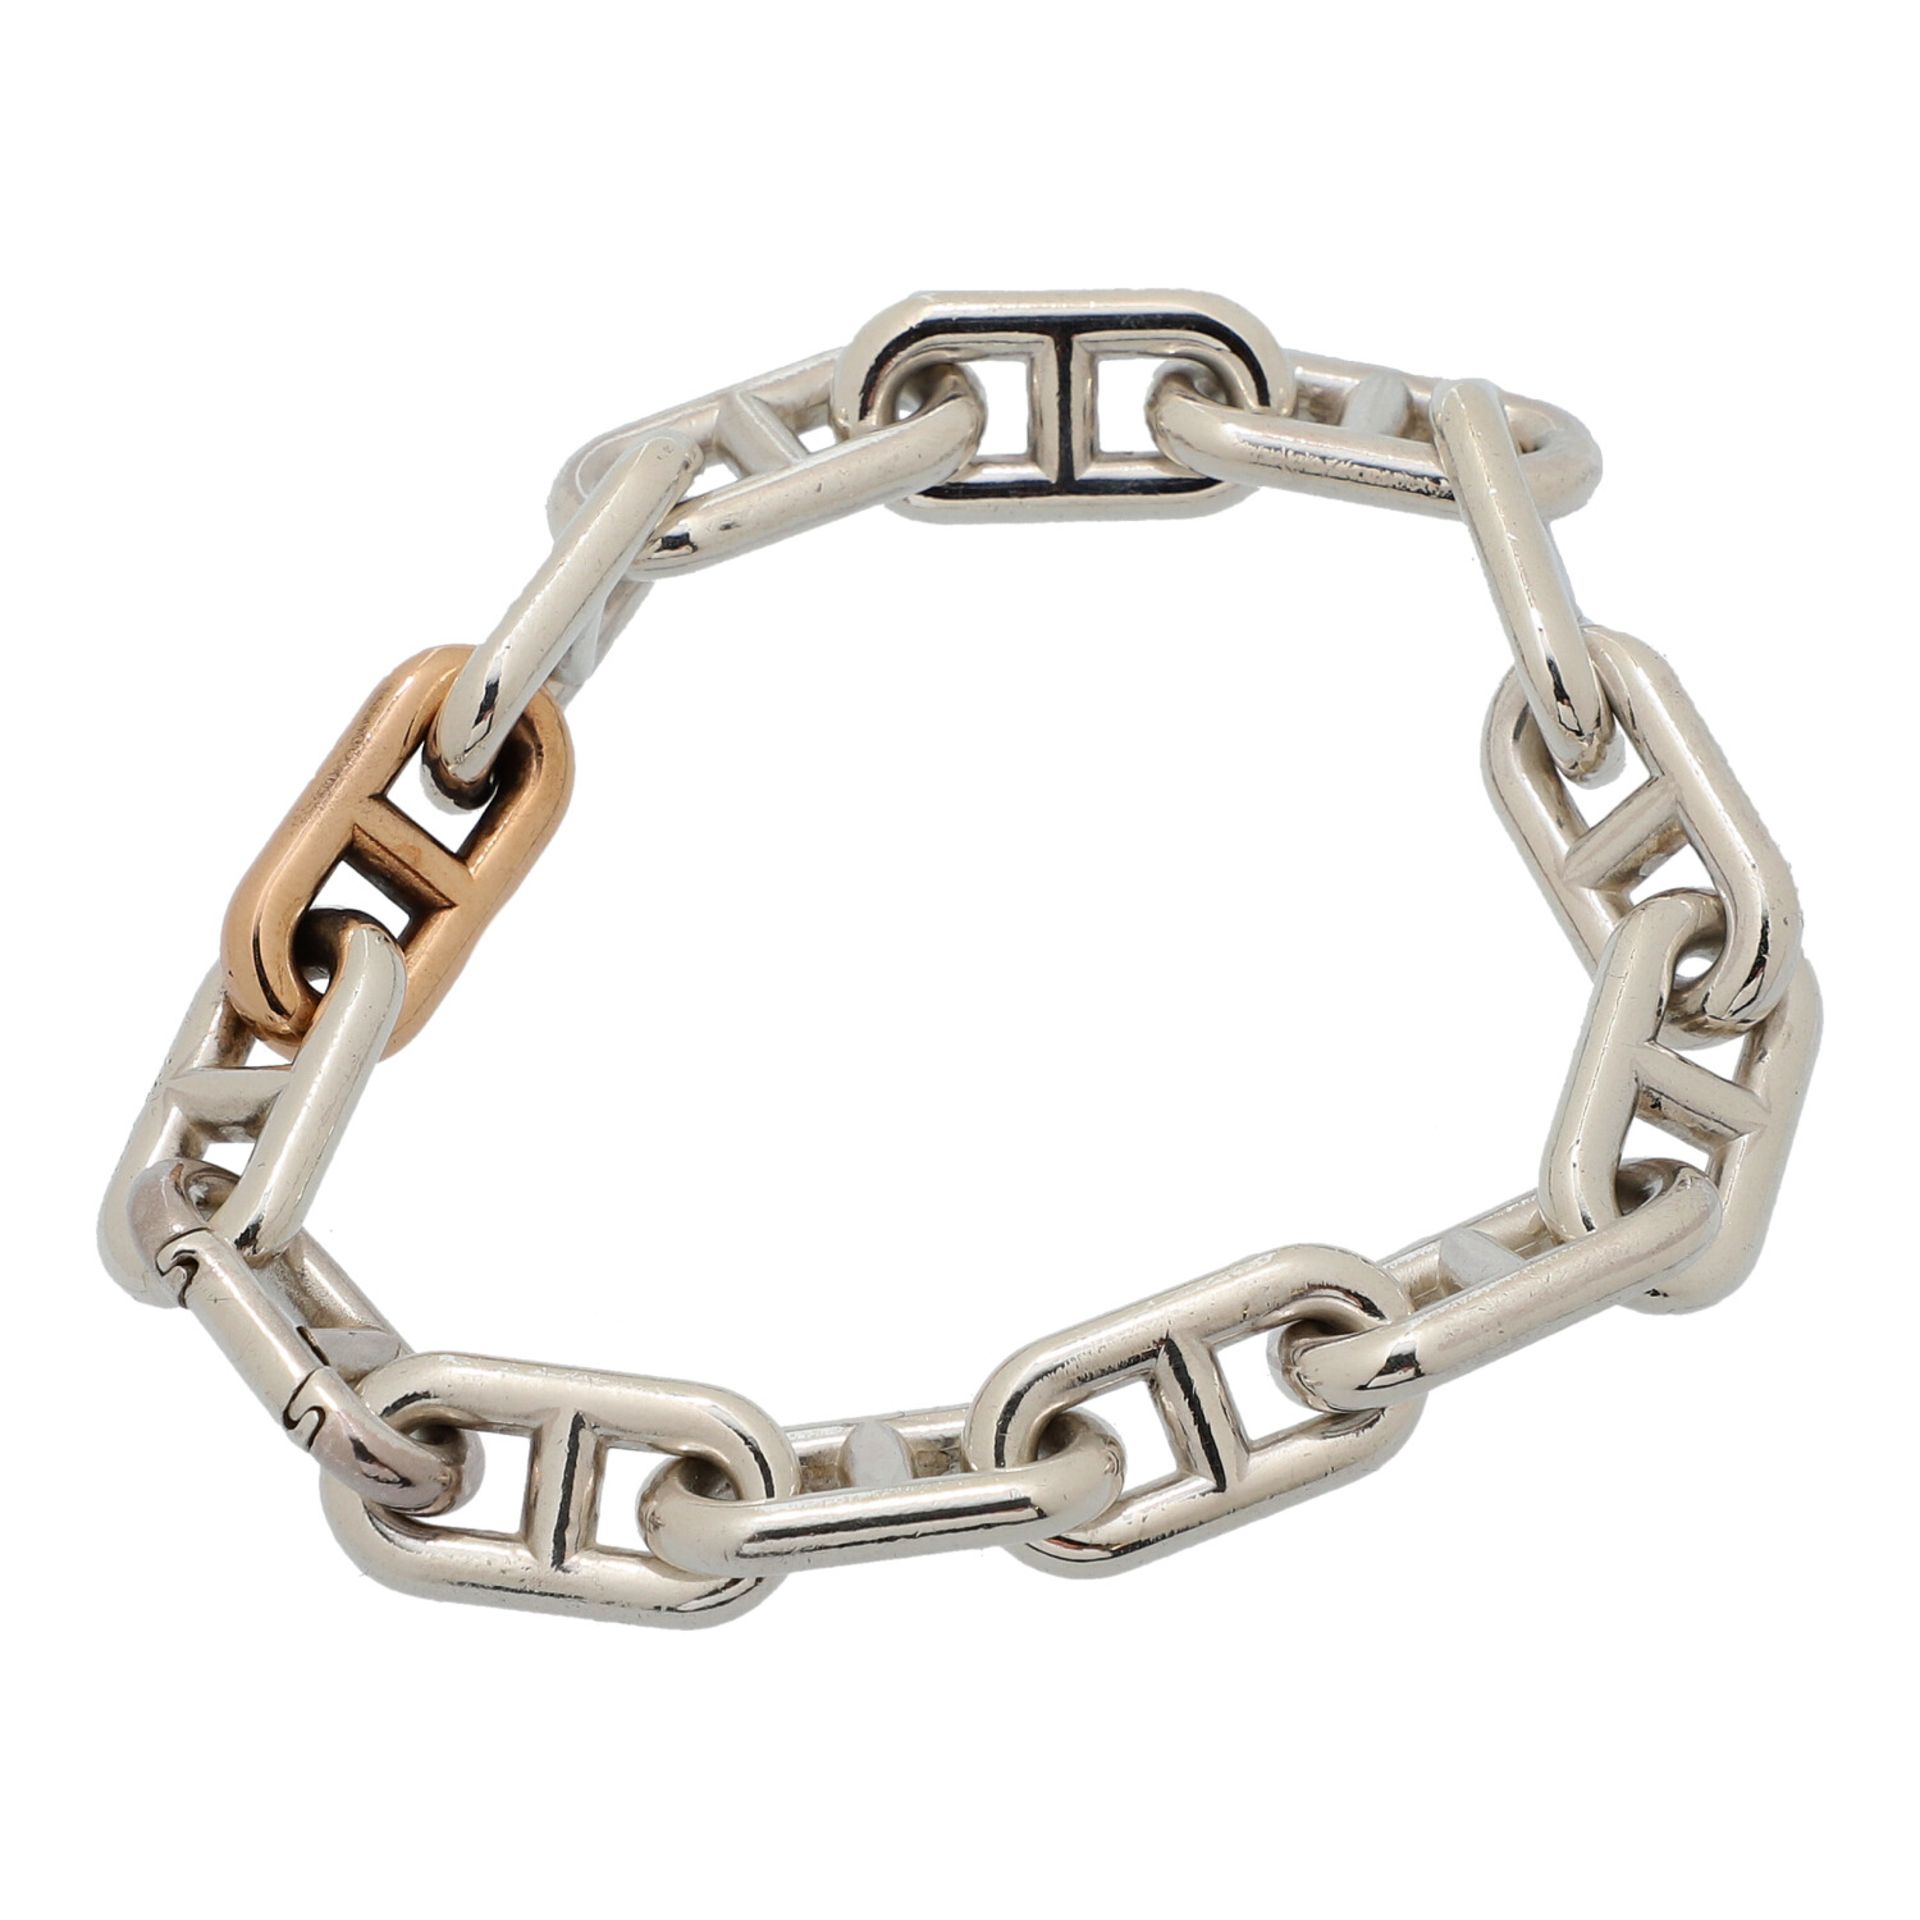 HERMÈS Armband "CHAINE D´ANCRE", - Image 3 of 3